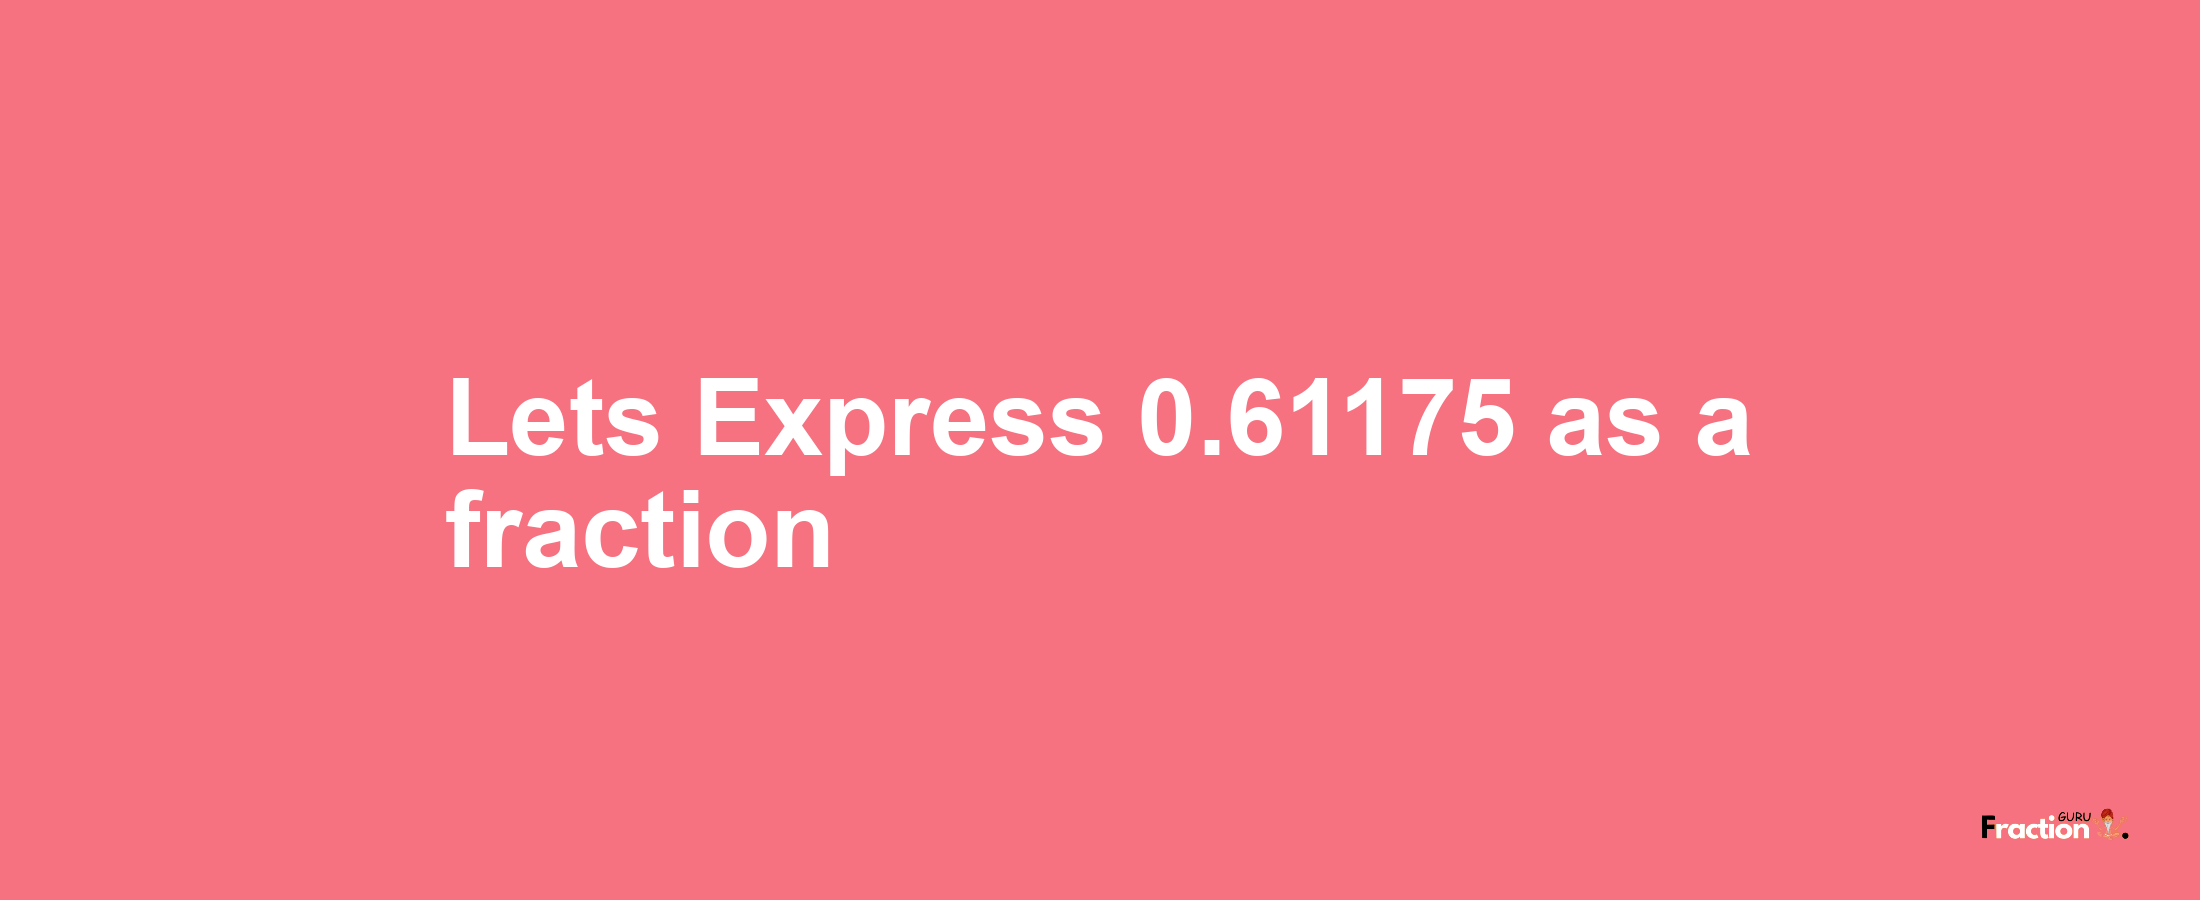 Lets Express 0.61175 as afraction